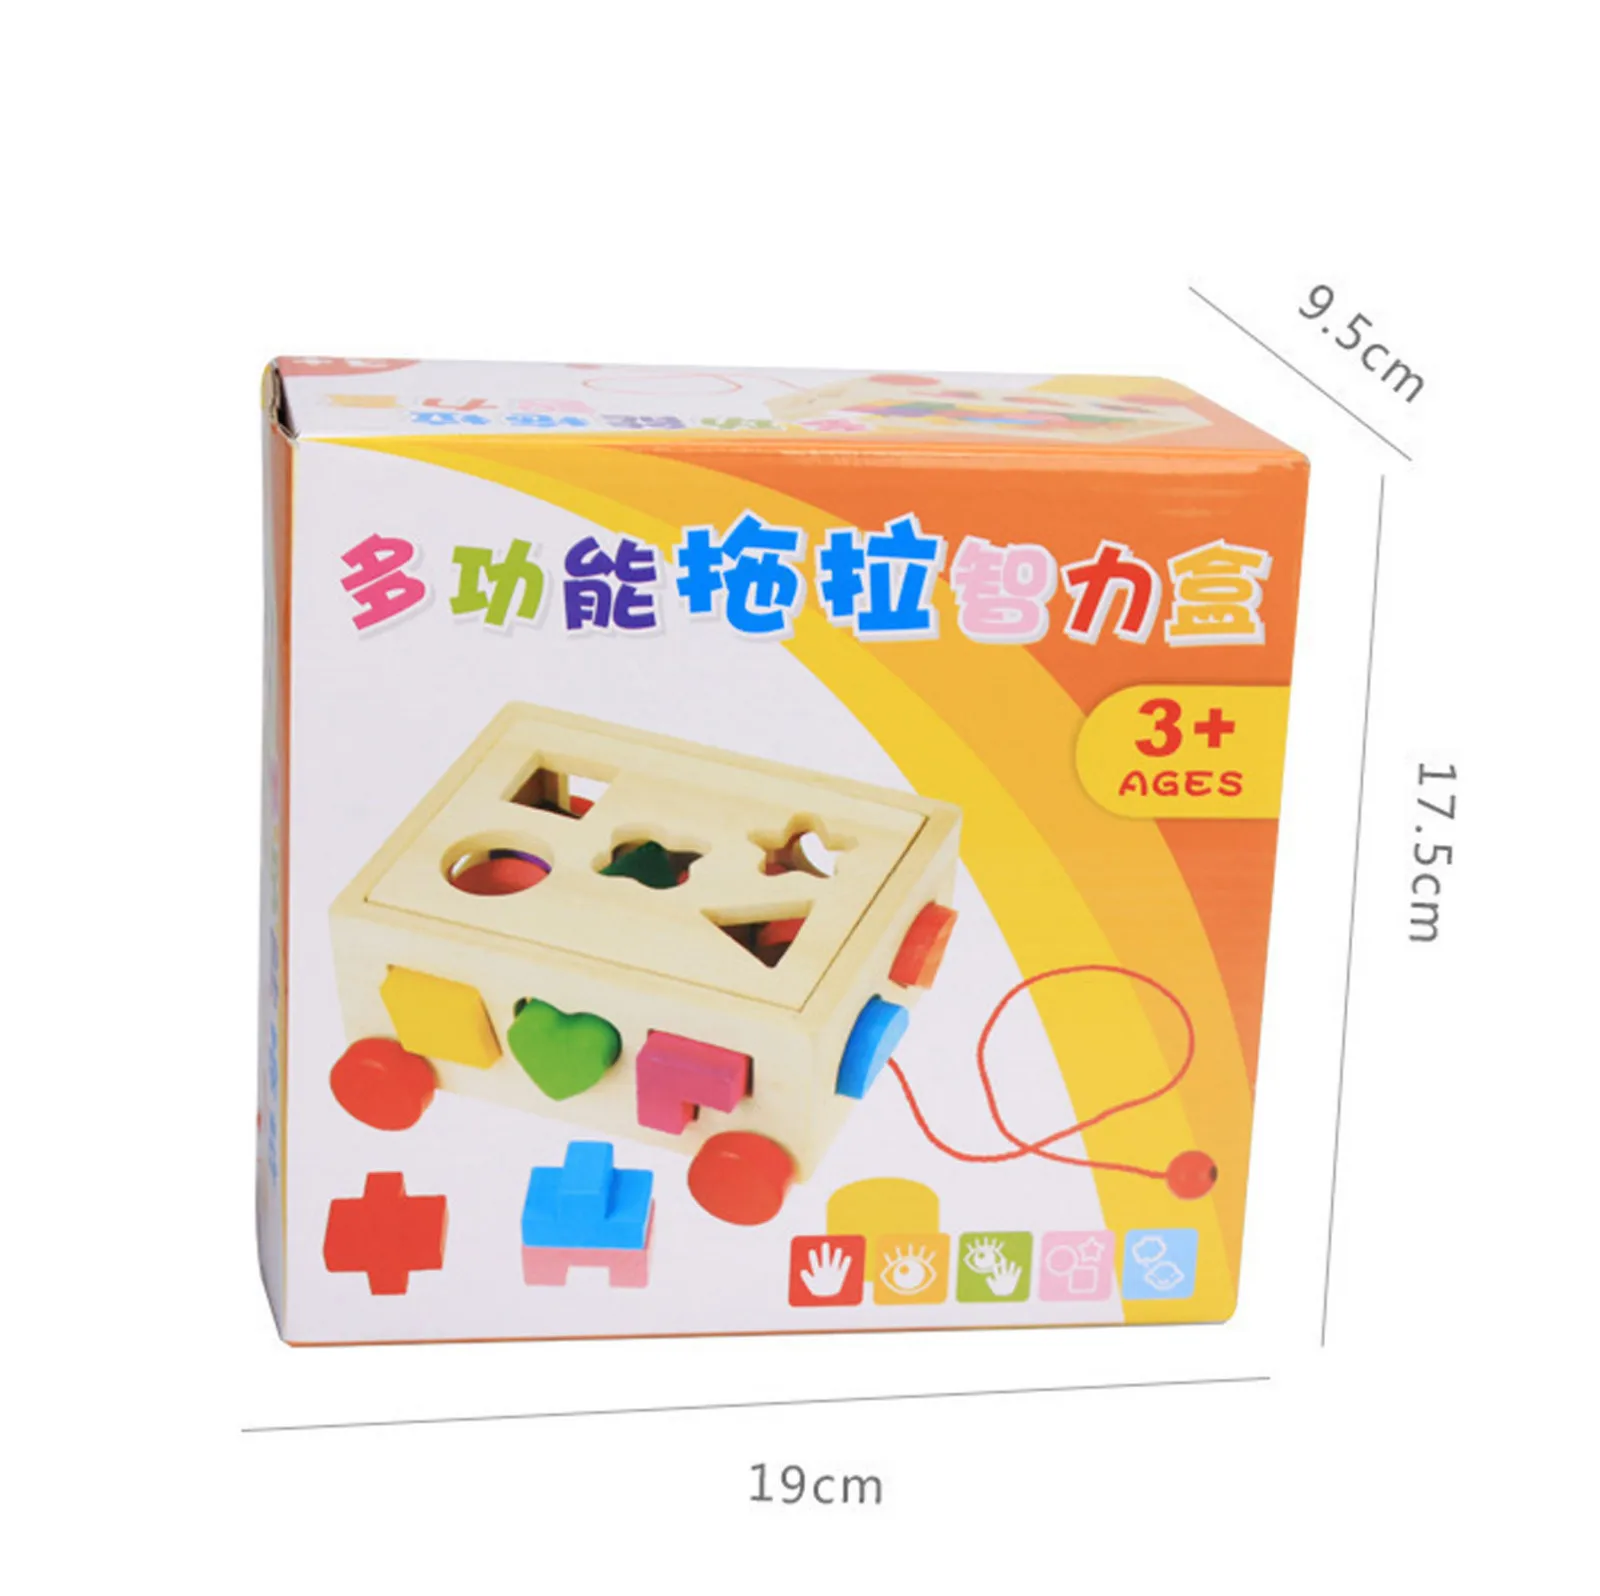 

Kids Baby wooden drag toys Learning Geometry Intellectual Box Children Educational Toys Jigsaw Puzzle 3D IQ Puzzle For Kids 340